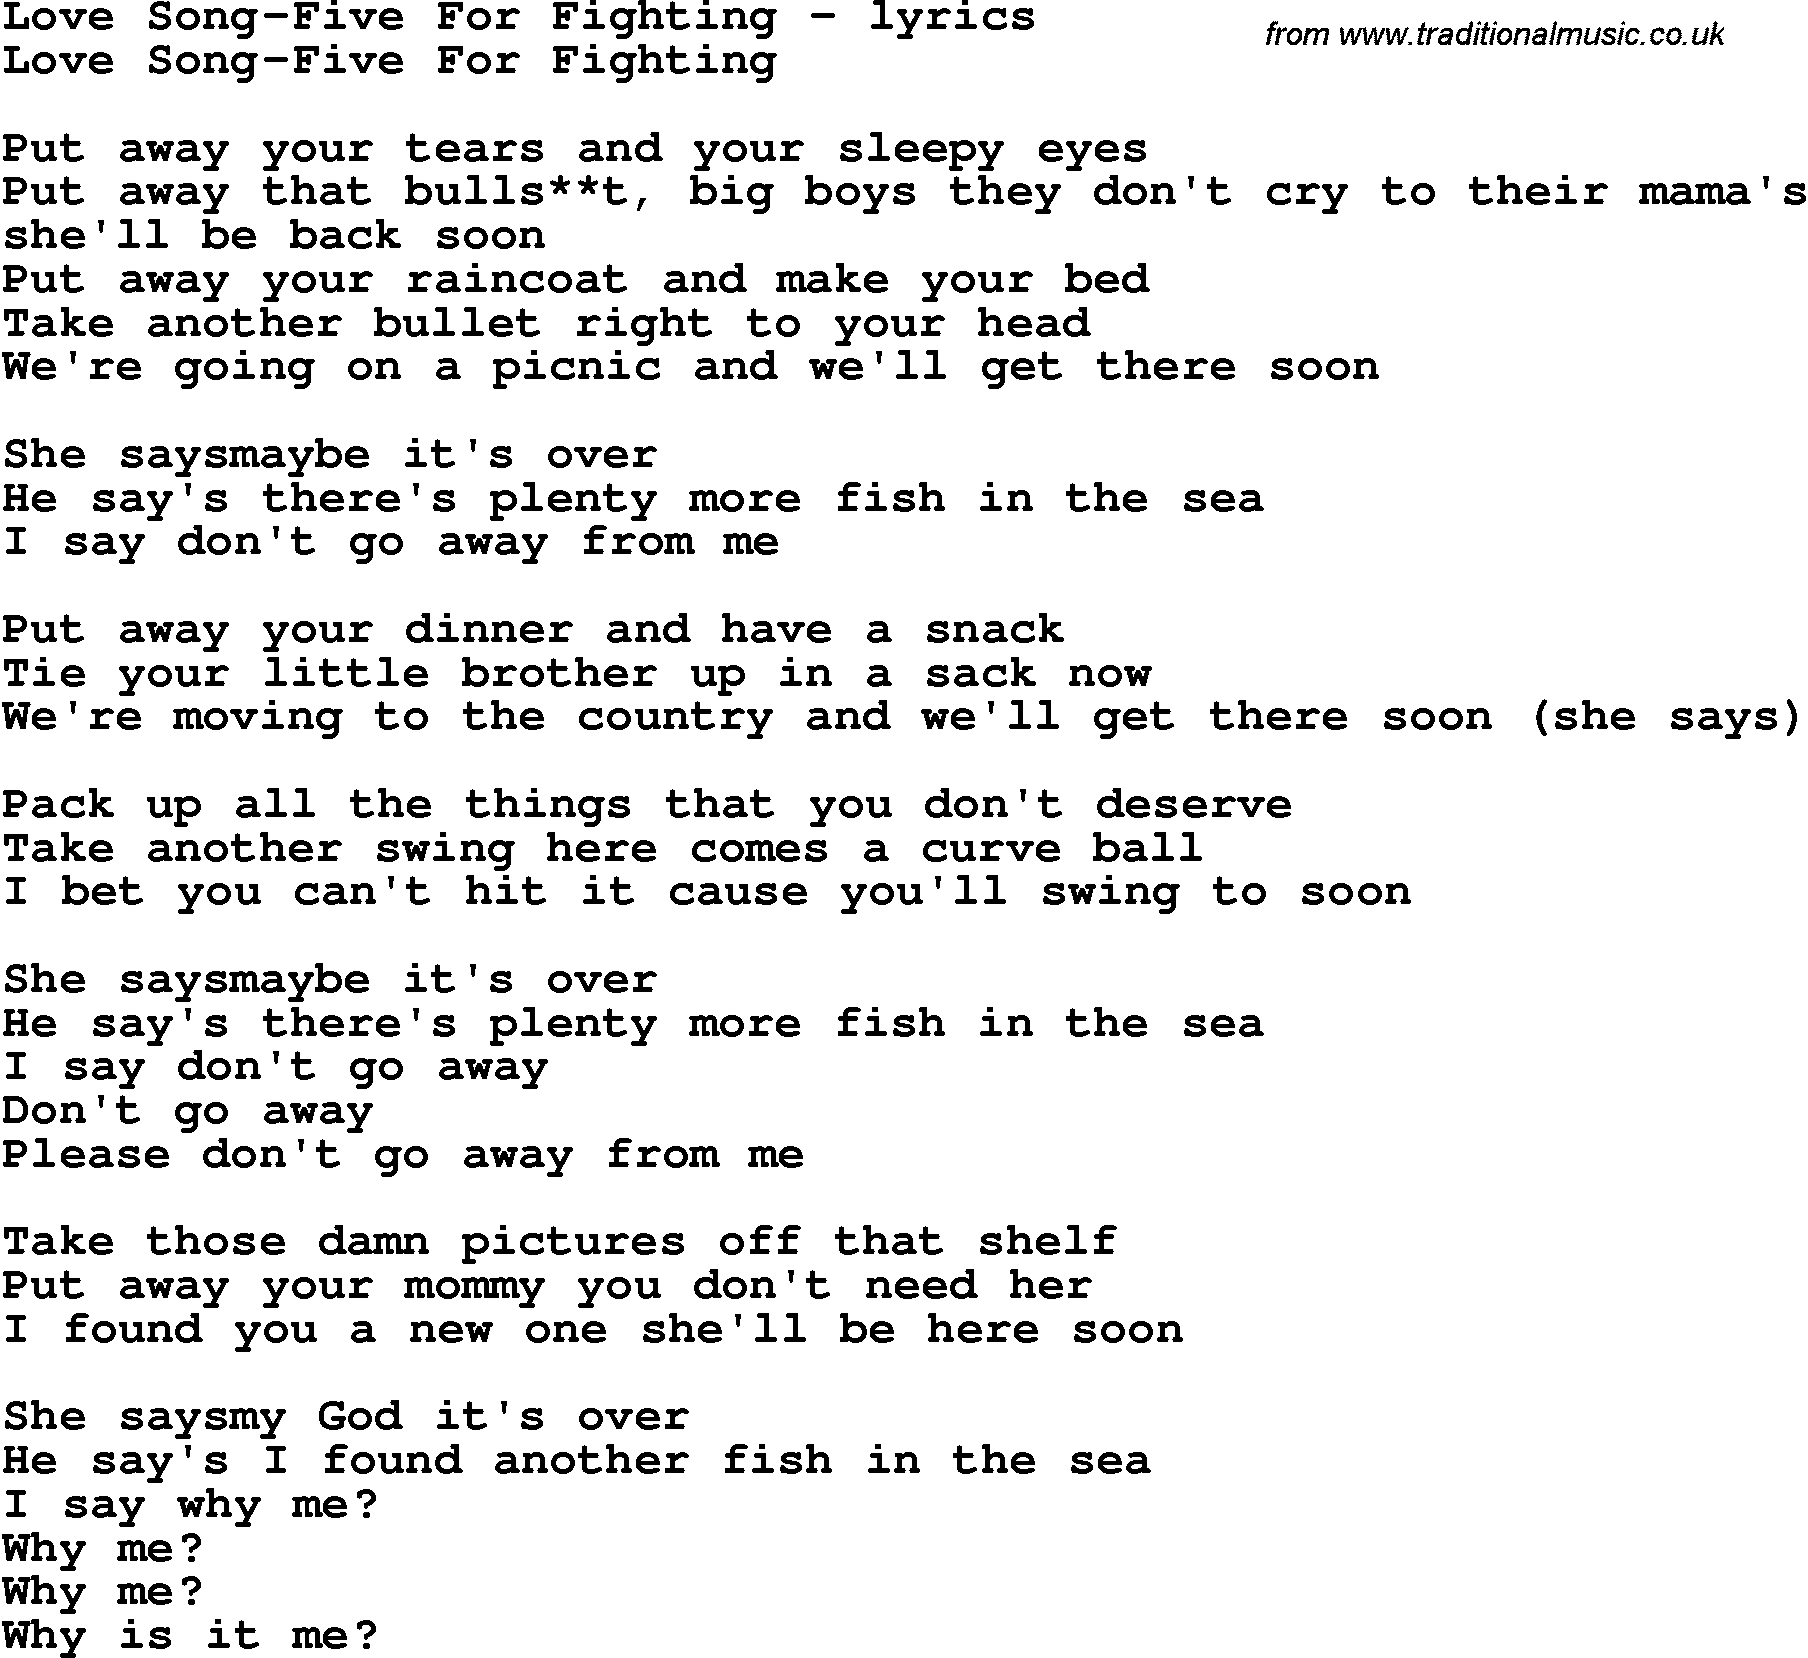 Five for Fighting - All for One Lyrics